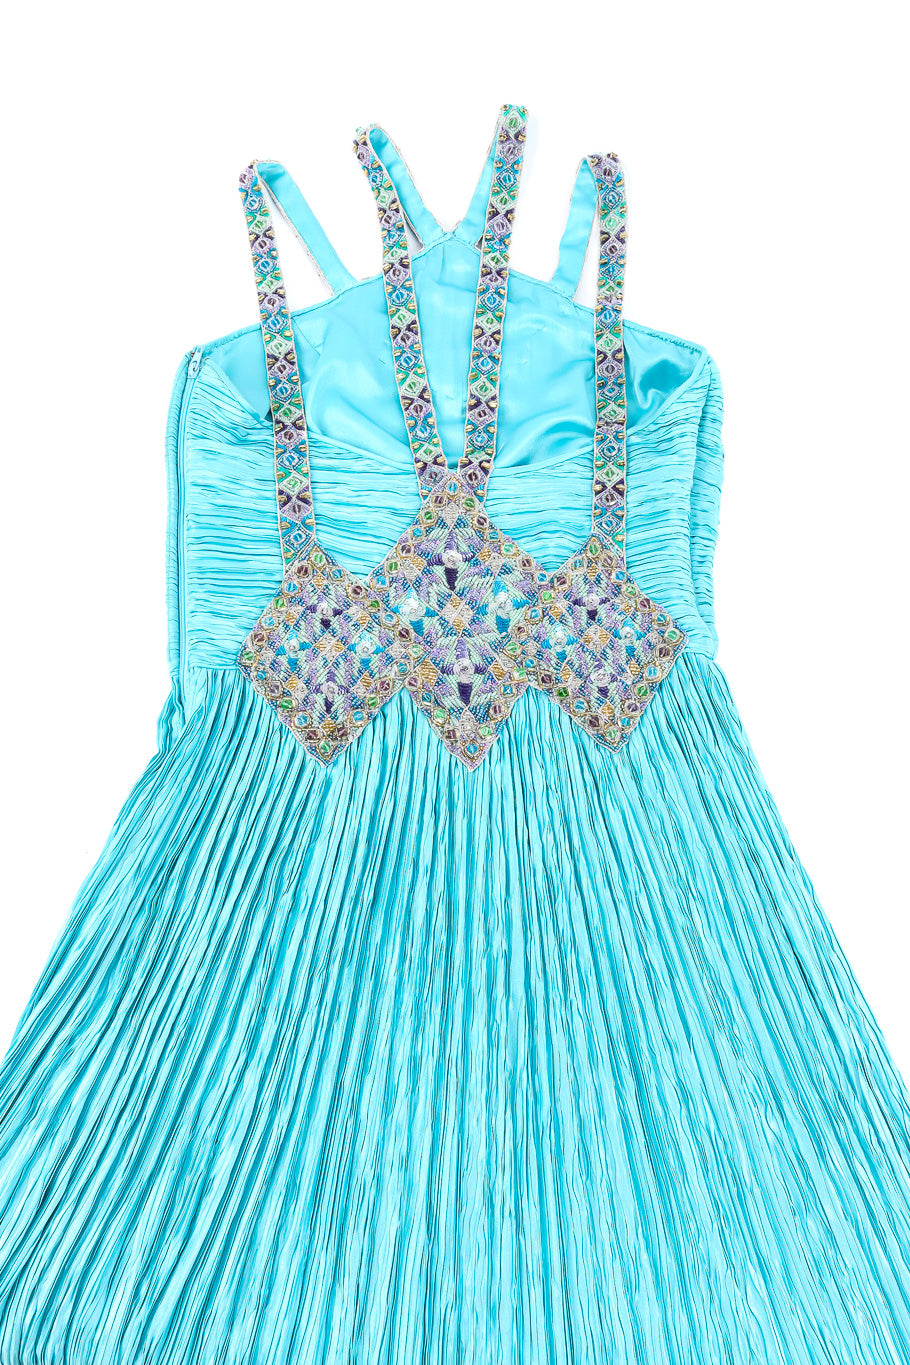 Embellished pleated gown by Mary McFadden flat lay back @recessla